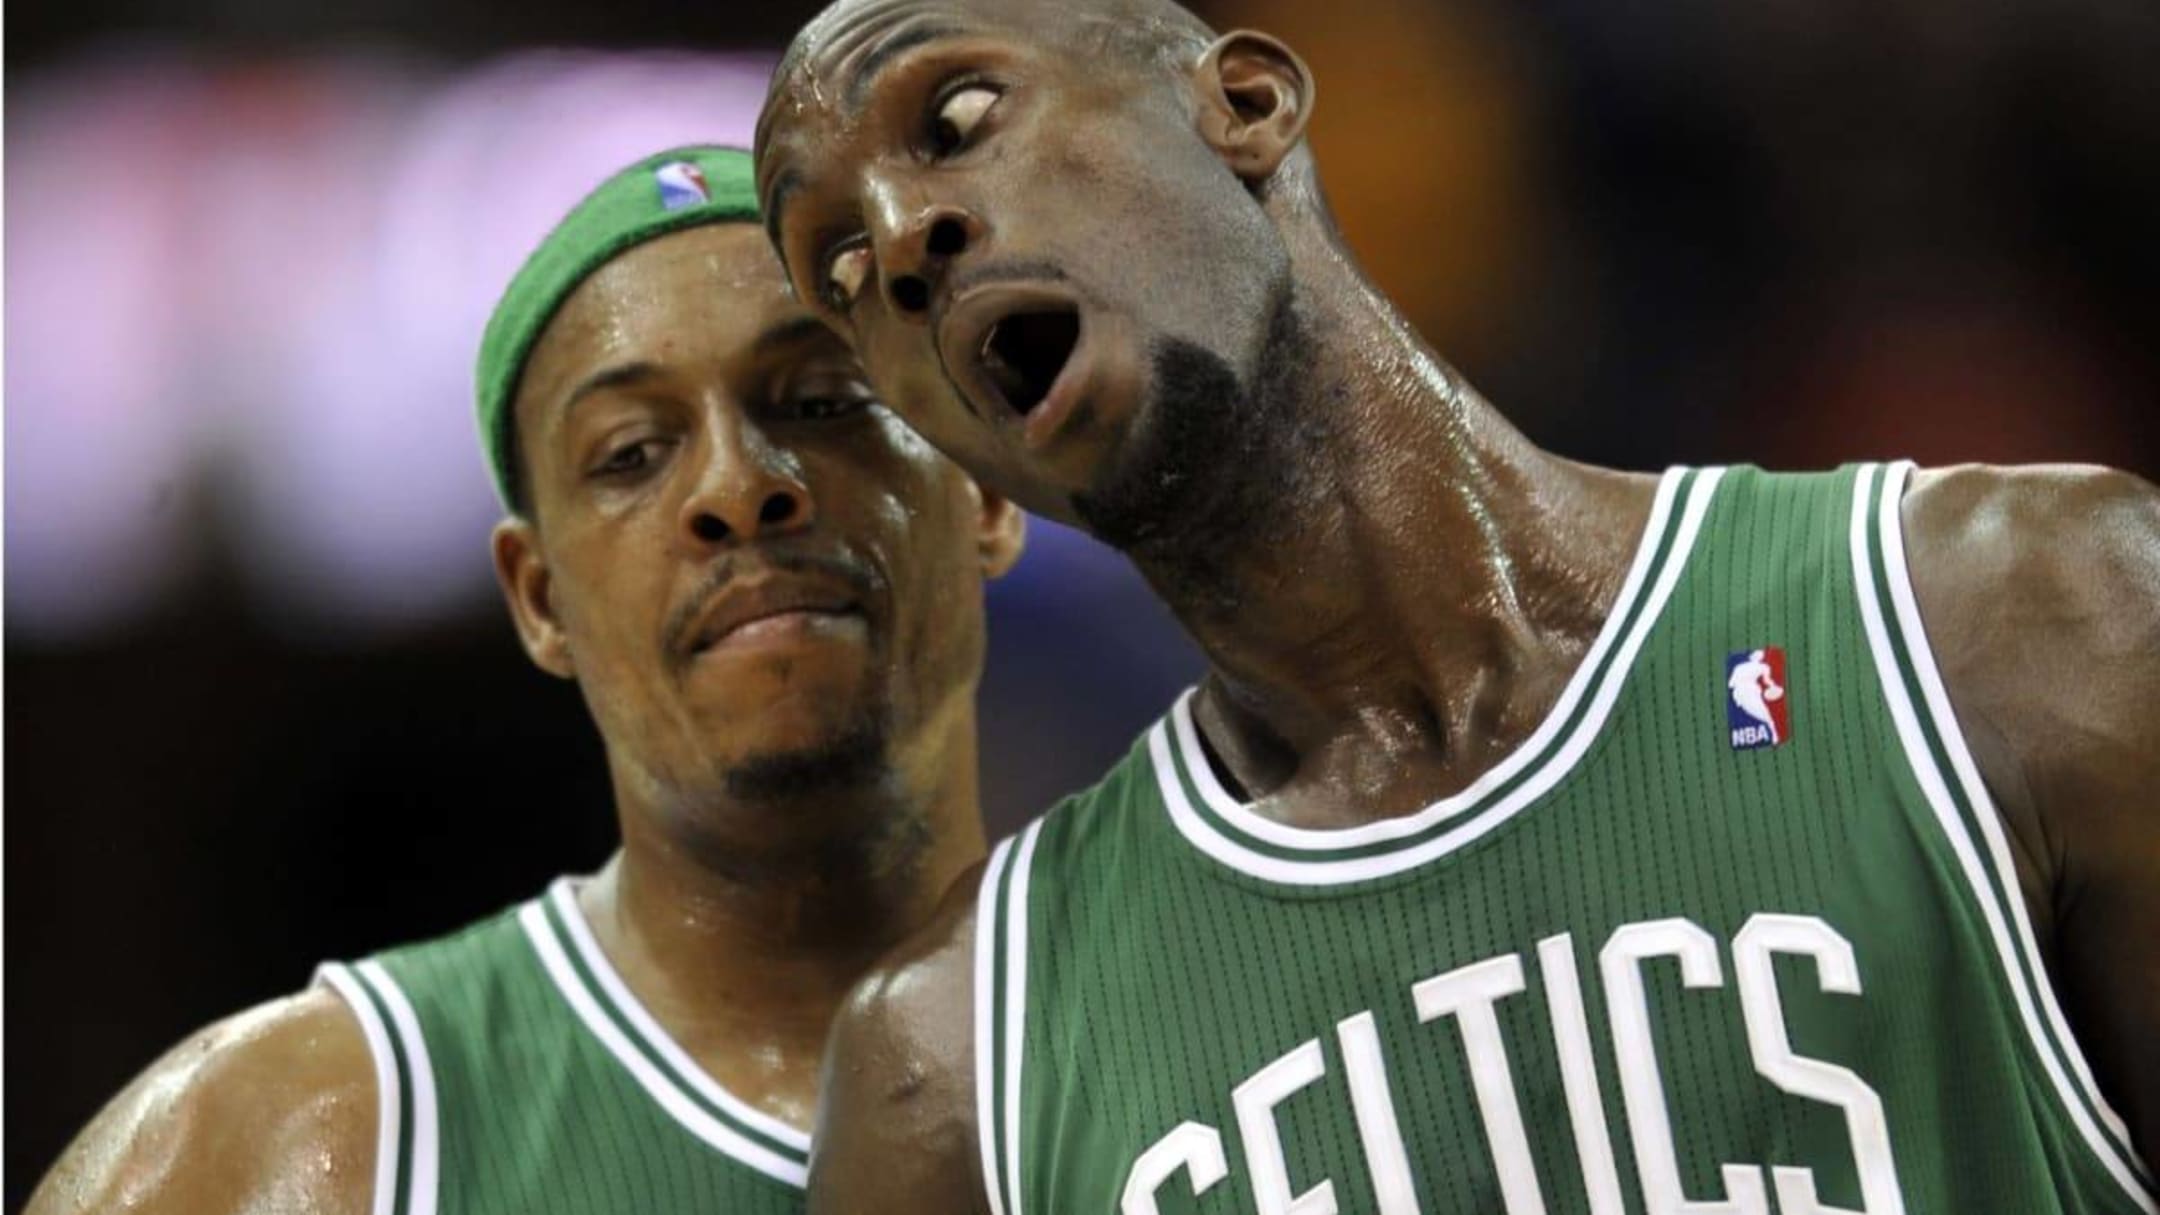 Kevin Garnett agrees to extension with Celtics - The Boston Globe